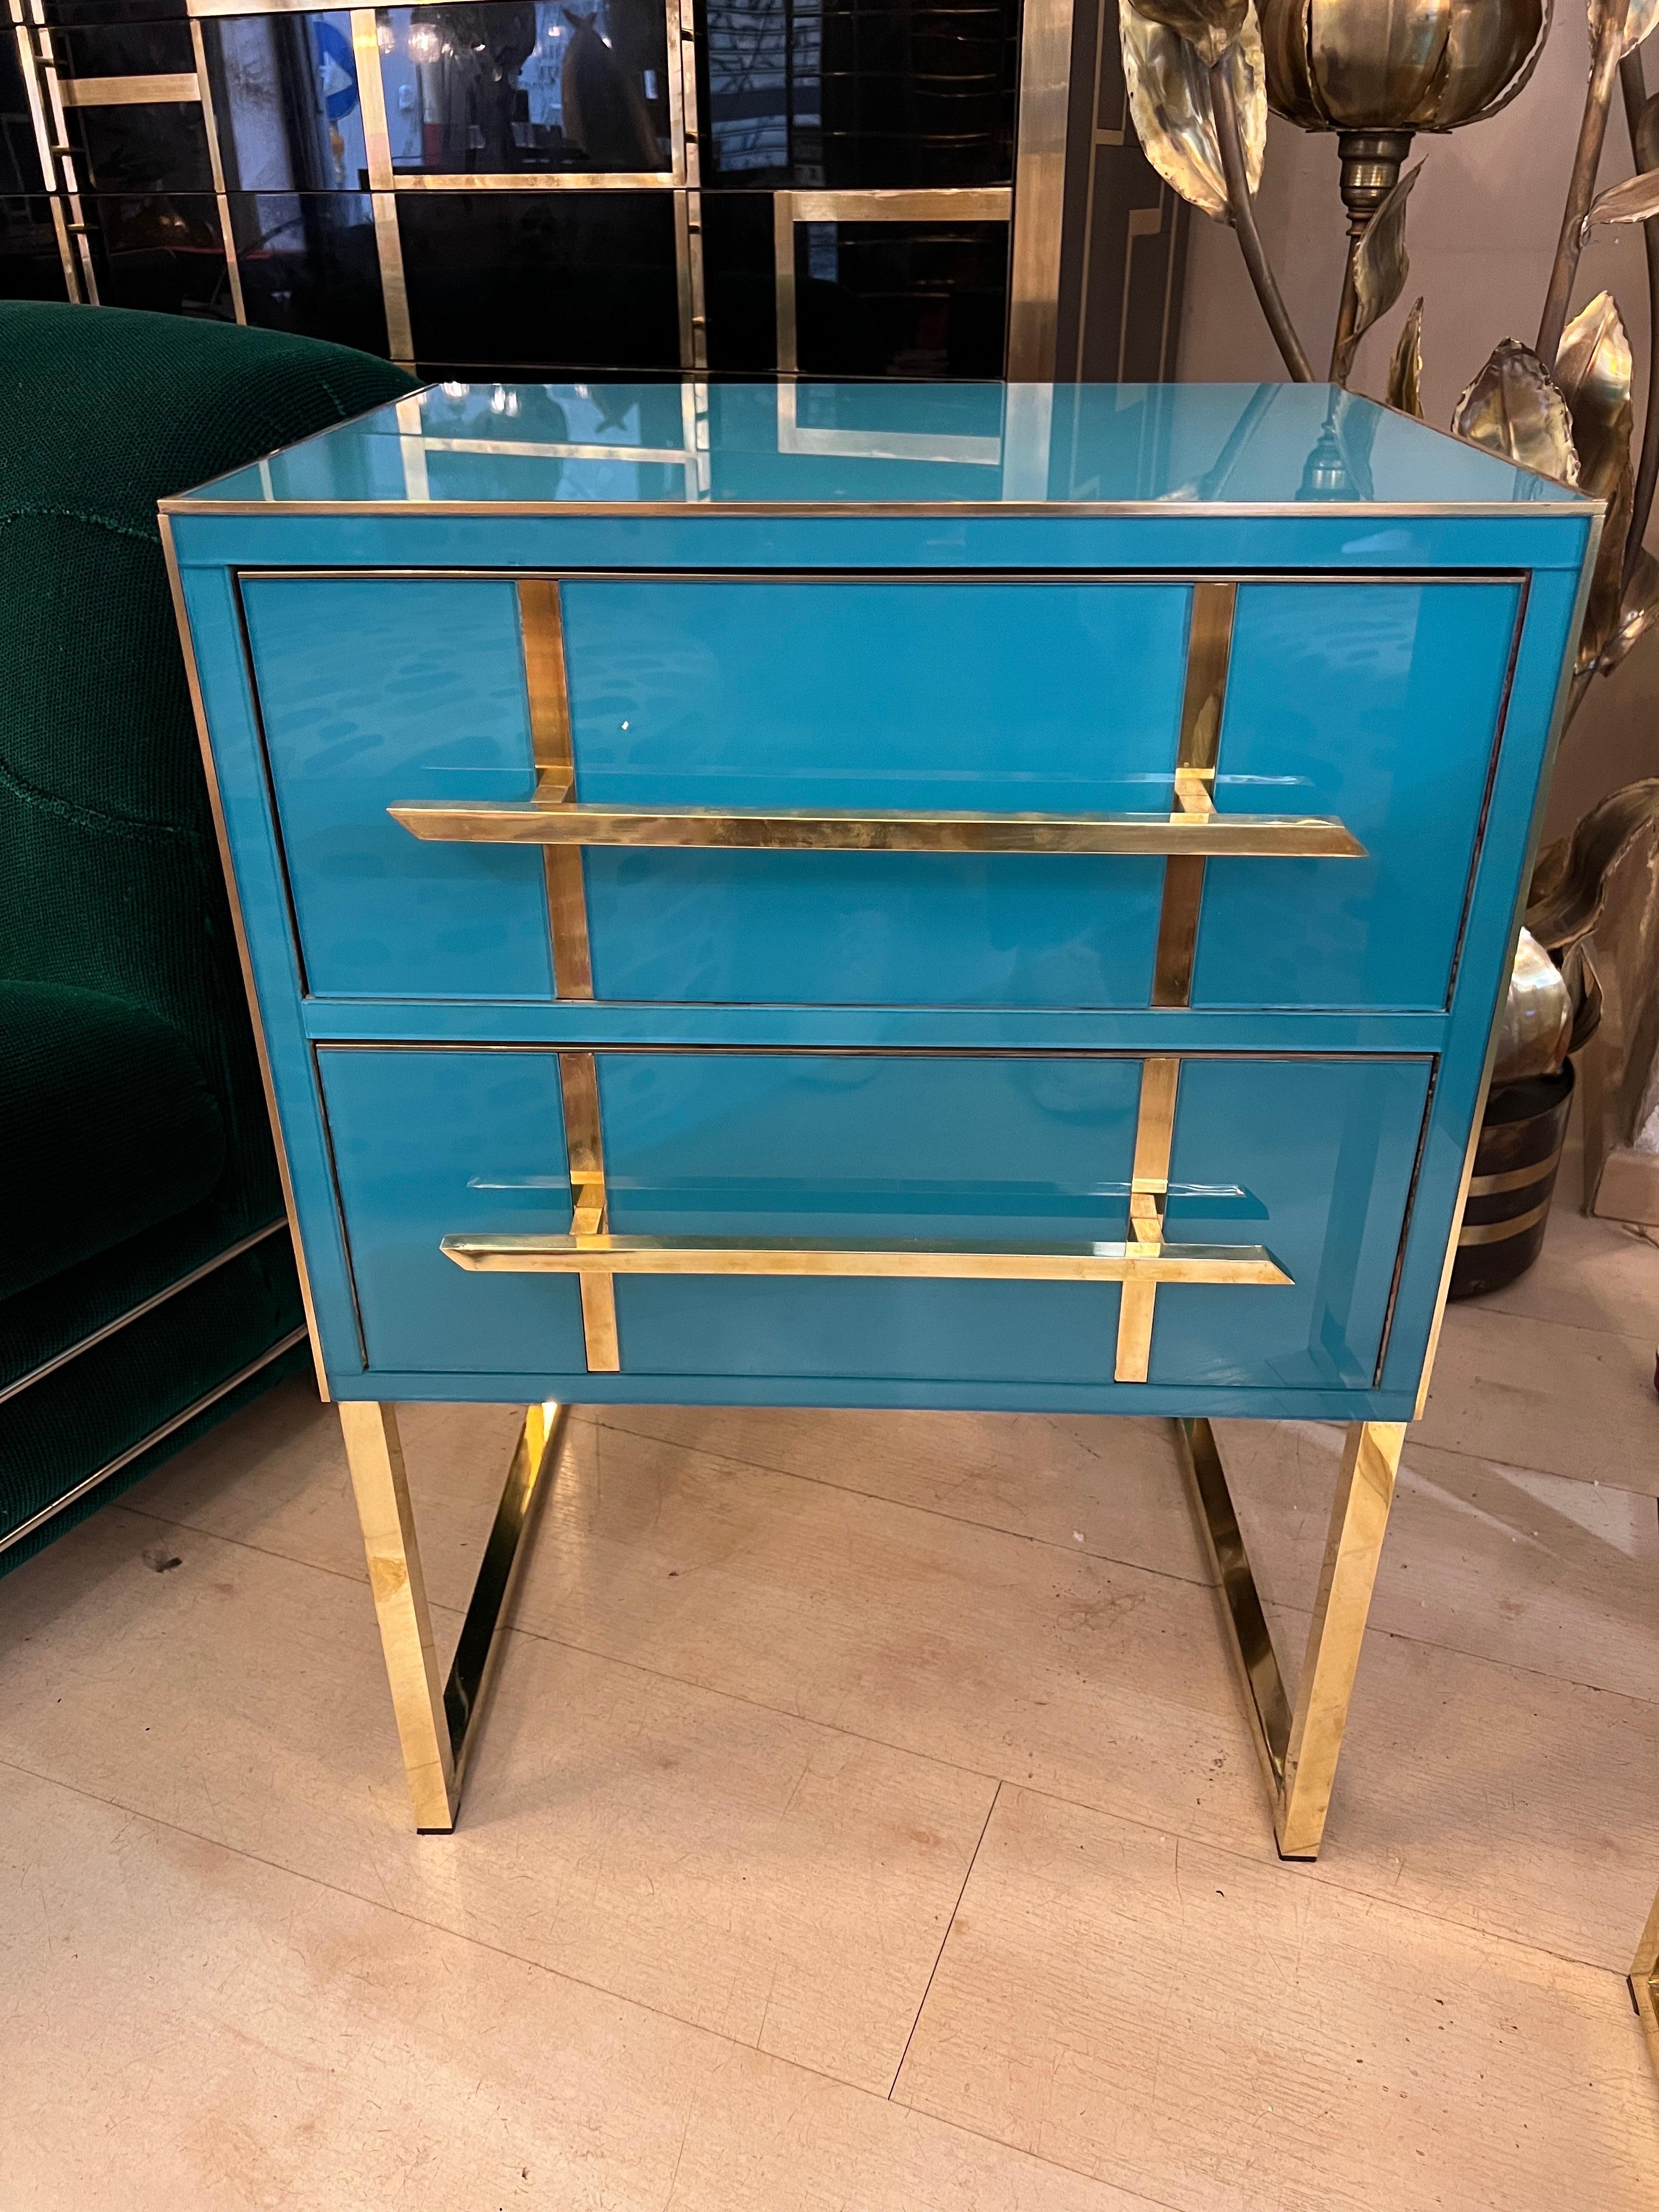 Italian turquoise opaline glass nightstands with two drawers, brass handles, inlays and legs. Can be also used as end tables.